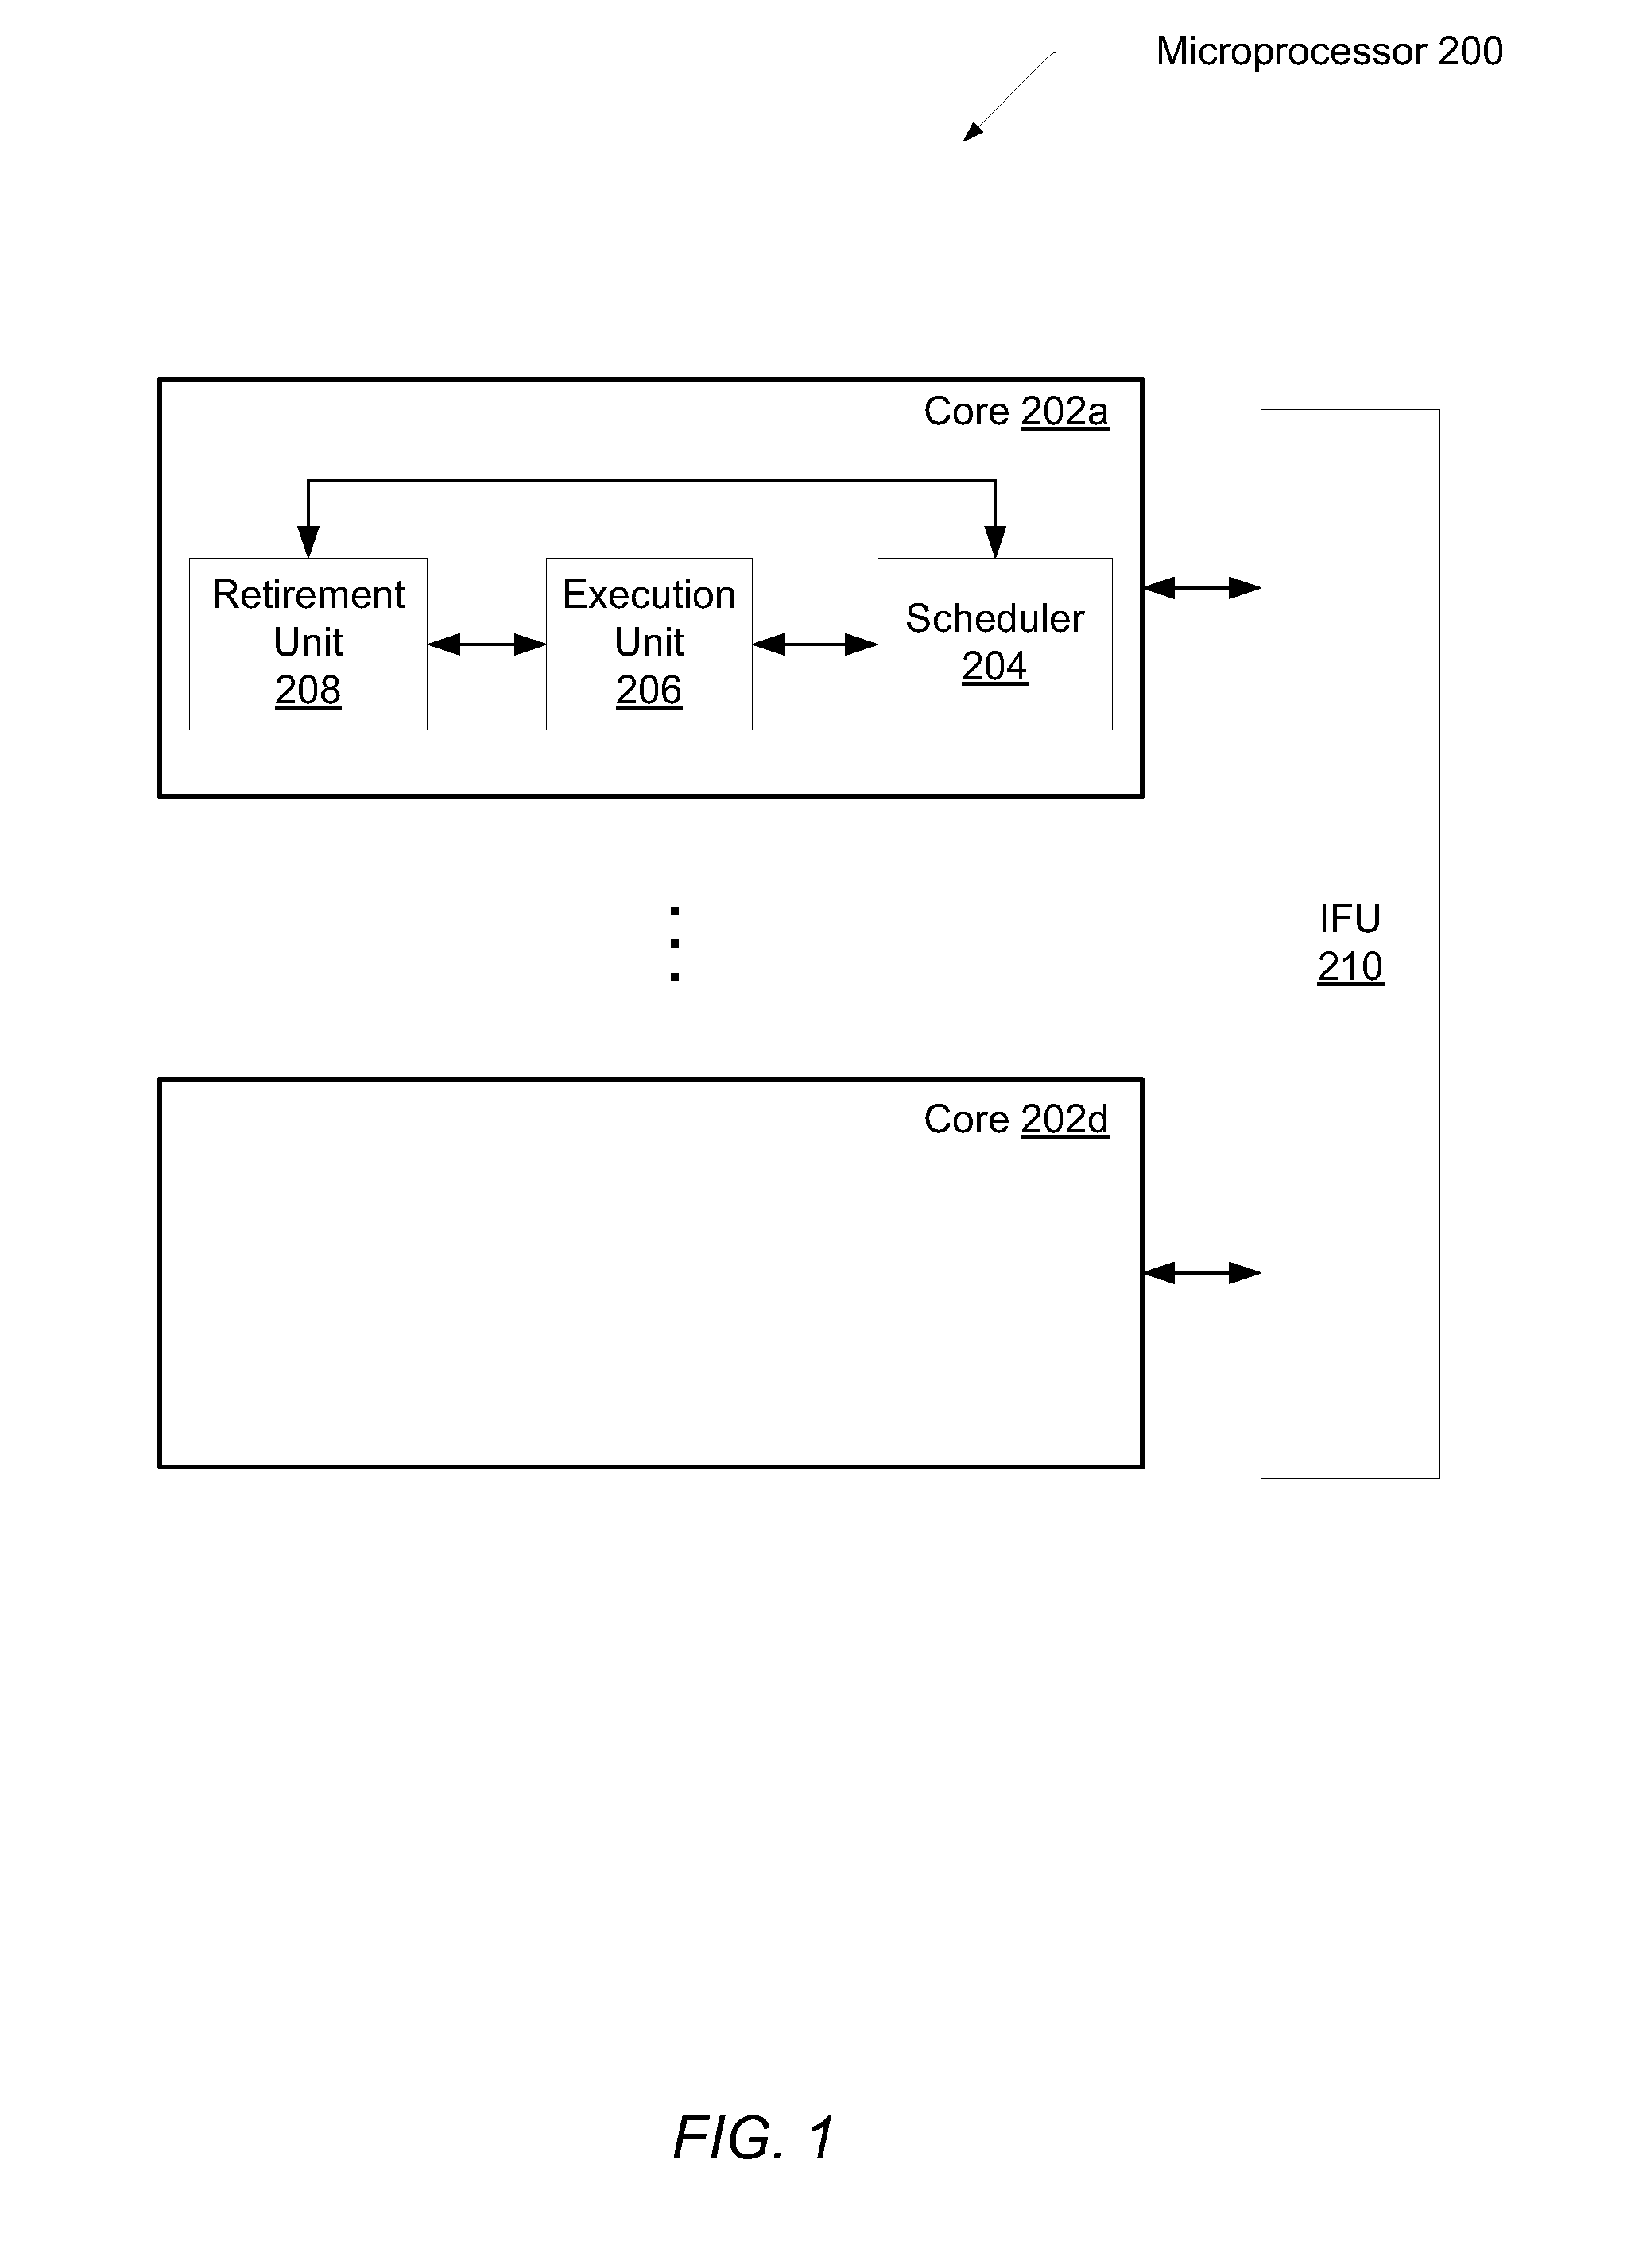 Branch misprediction recovery mechanism for microprocessors